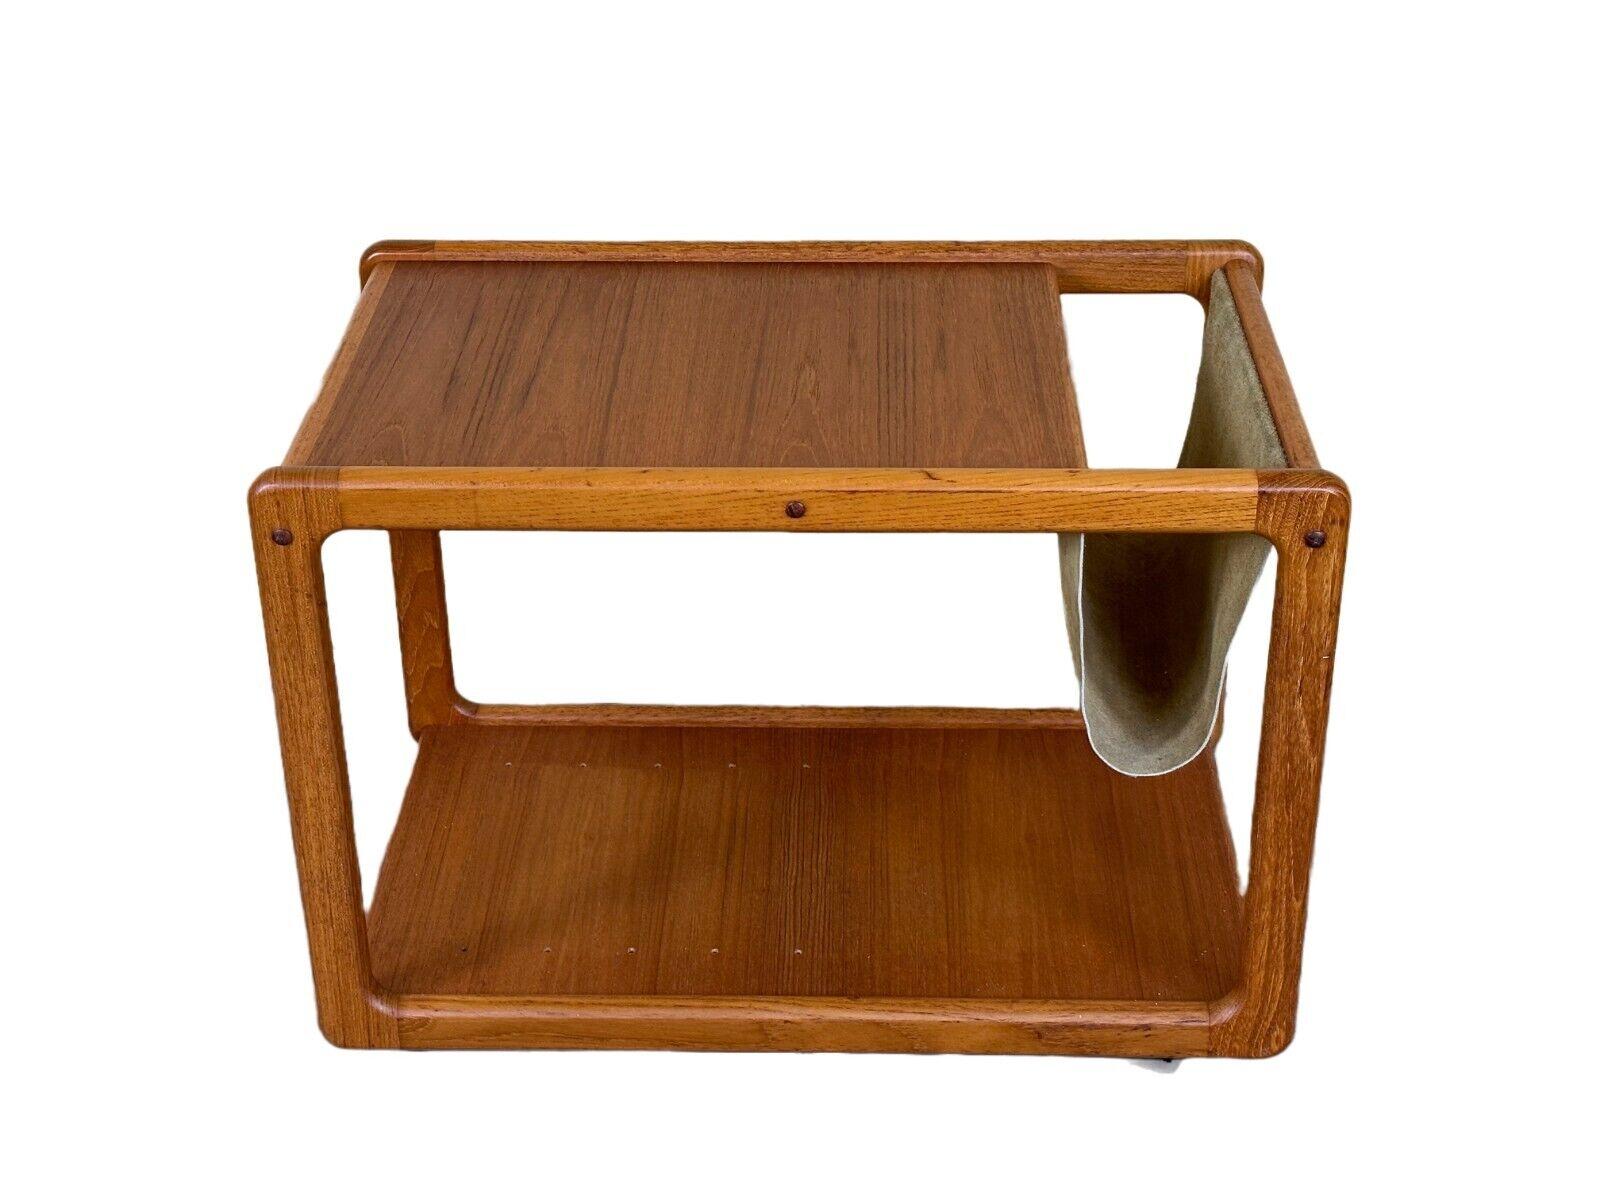 1960s-1970s Teak table side table newspaper stand Danish Design, Denmark

Object: side table

Manufacturer:

Condition: good

Age: around 1960-1970

Dimensions:

Width = 72.5cm
Depth = 43.5cm
Height = 54cm

Other notes:

The